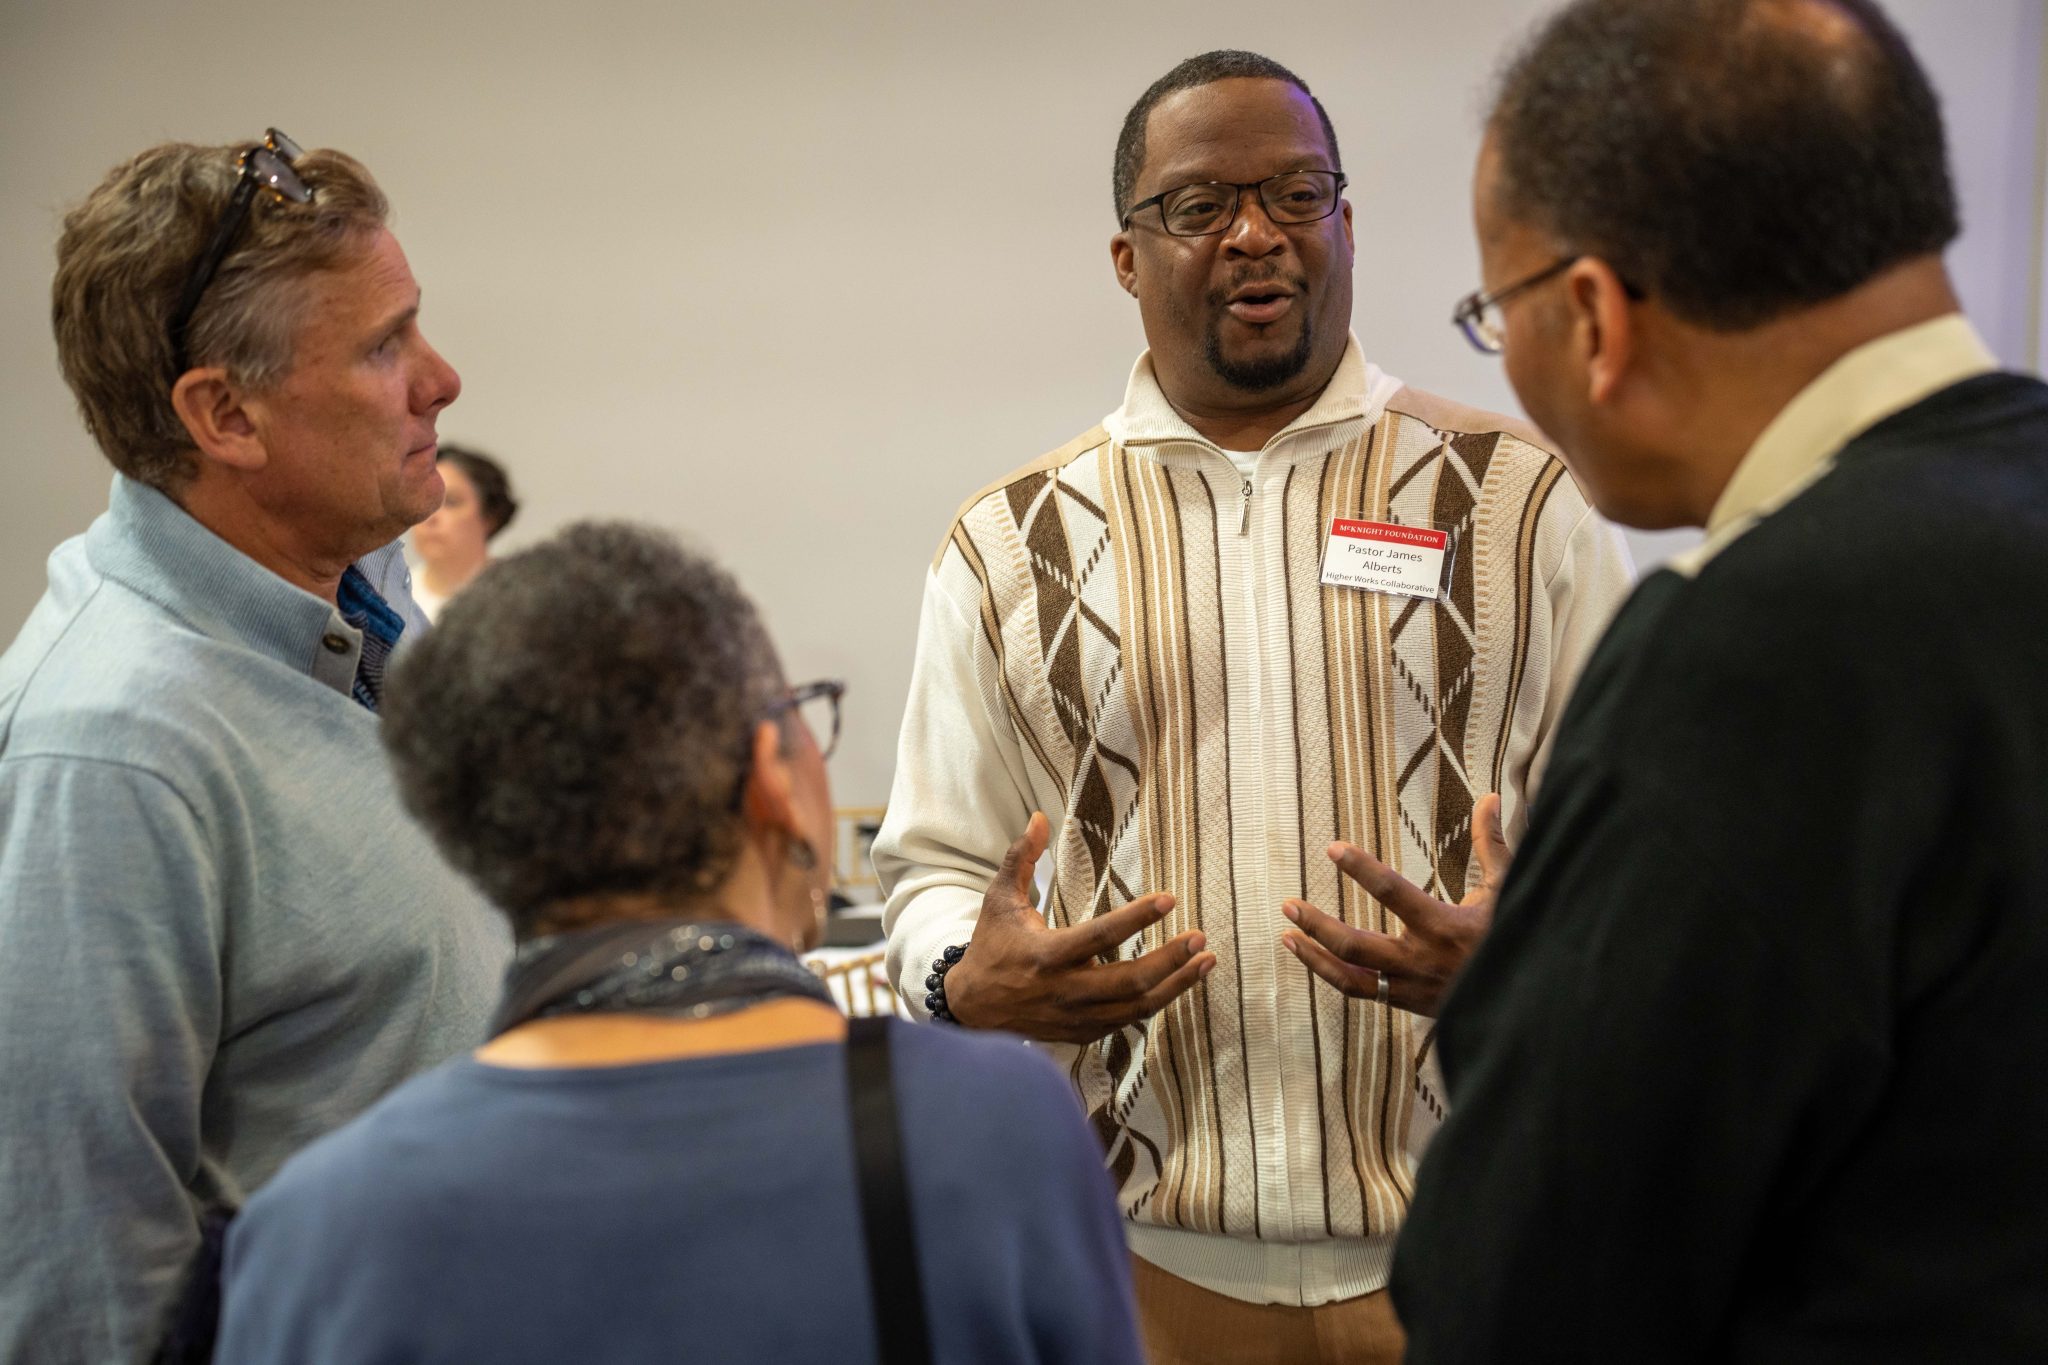 Pastor James Alberts II (center) shares his perspectives with McKnight board members during a gathering in St. Cloud.